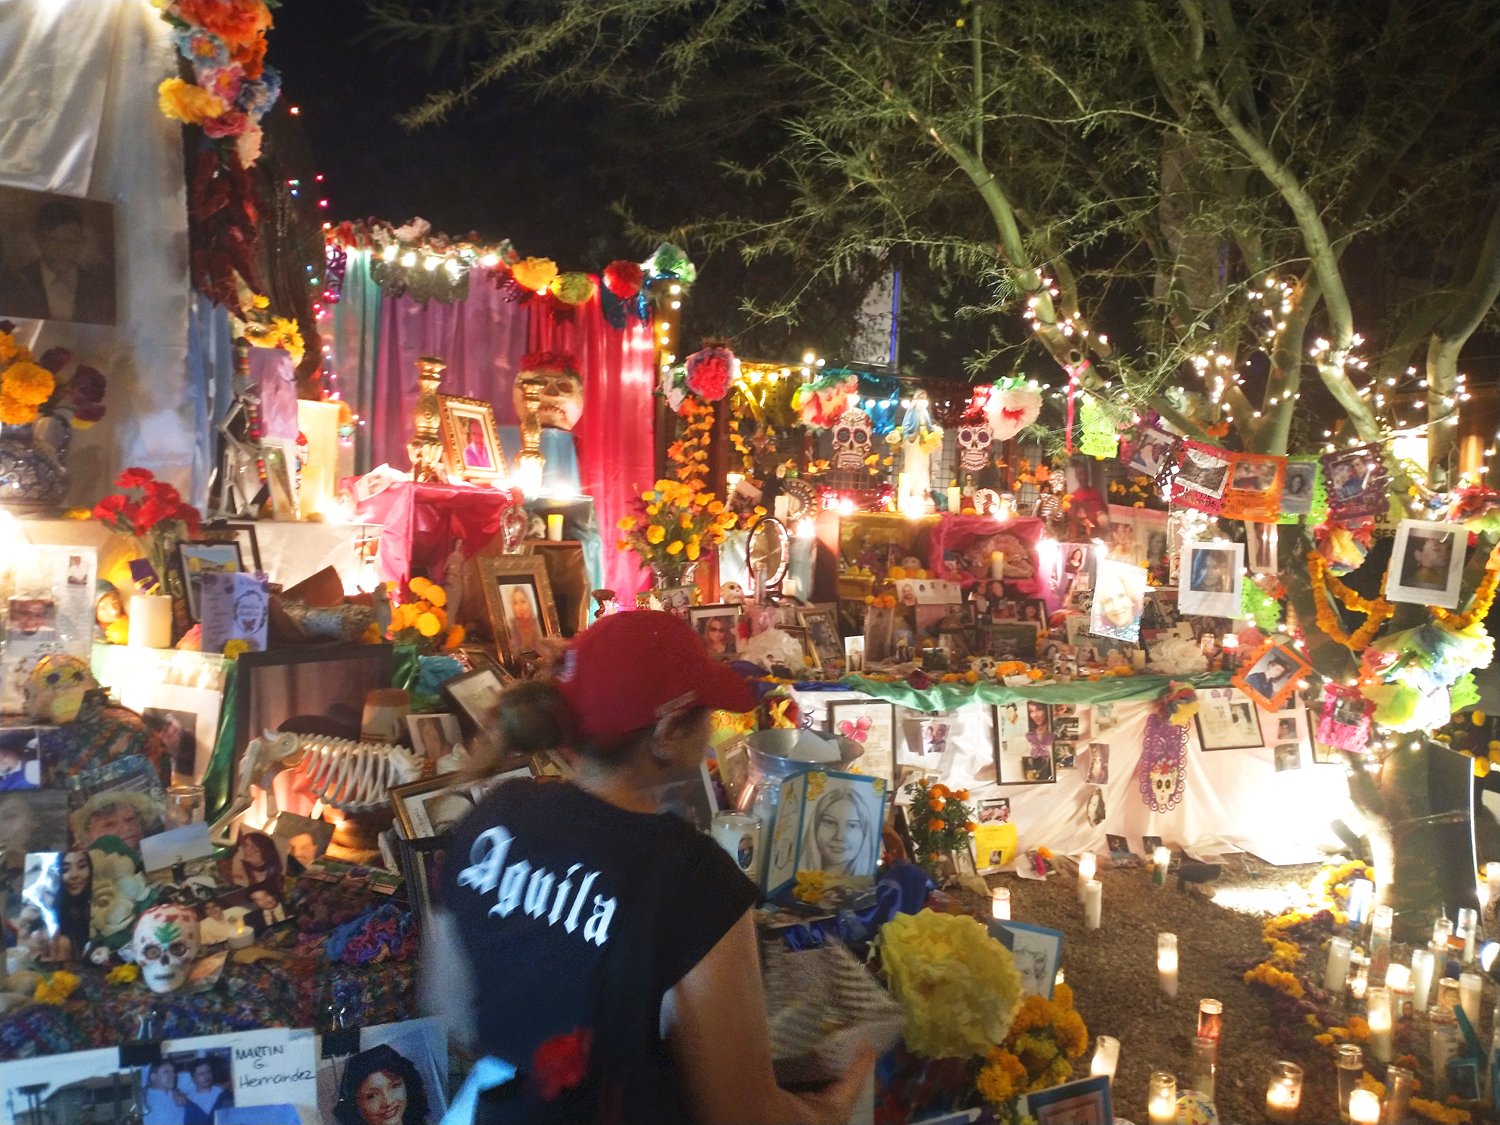 First day in Tuscon we did the Day of the Dead celebration, where ppl remember their deceased loved ones.